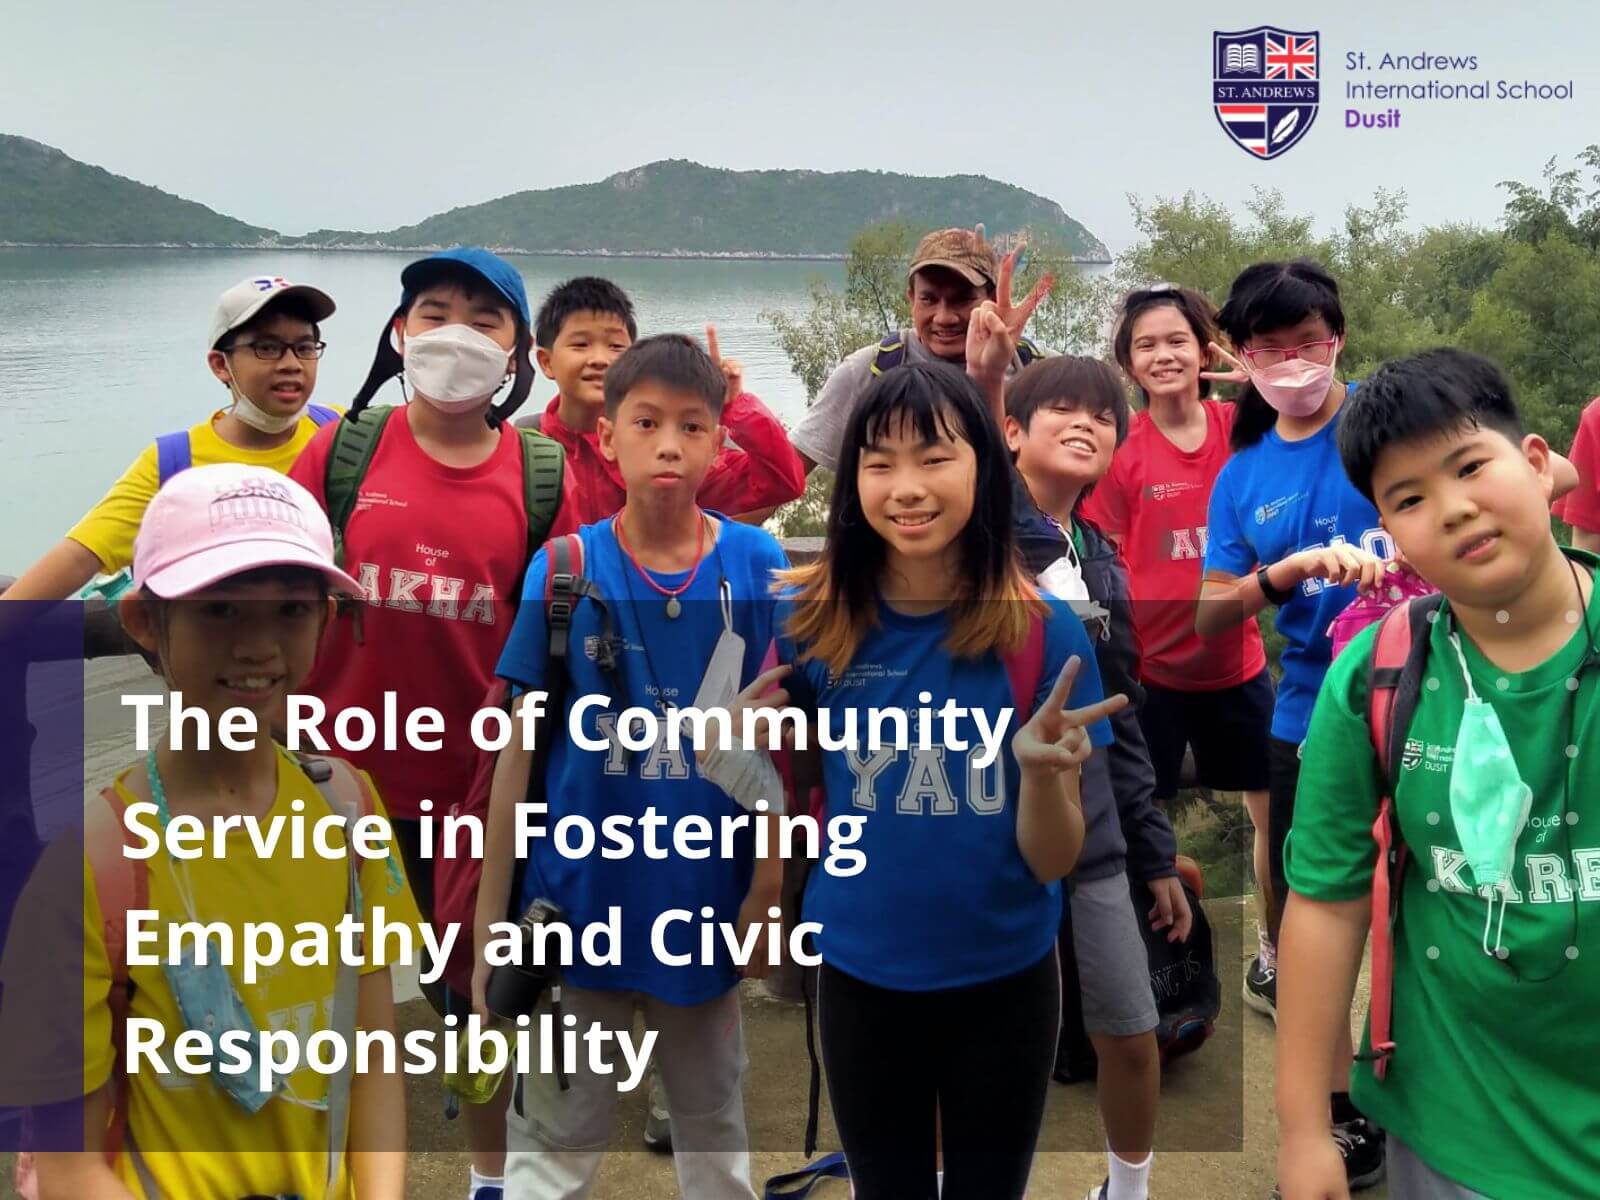 The Role of Community Service in Fostering Empathy and Civic Responsibility